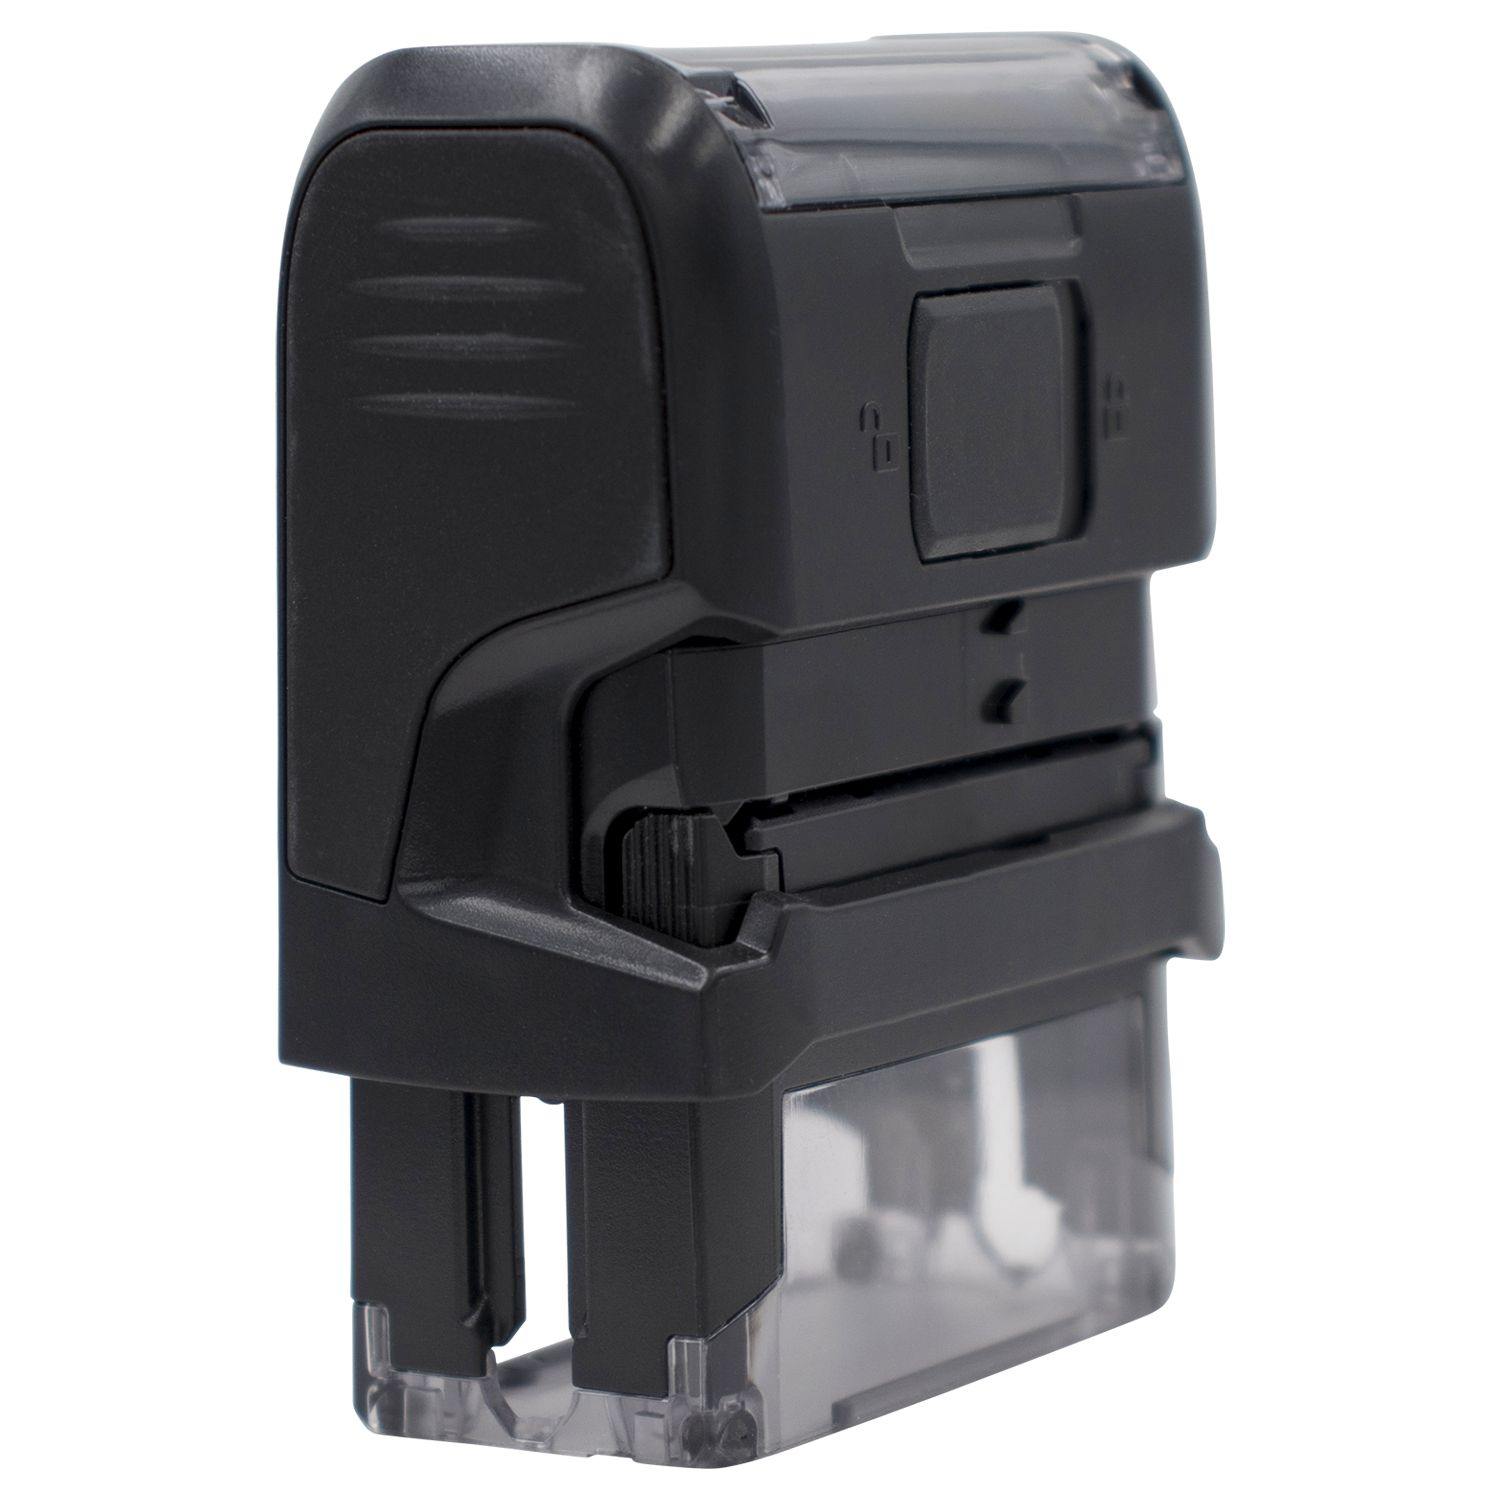 Large Self-Inking Attorneys' Copy Stamp Back View